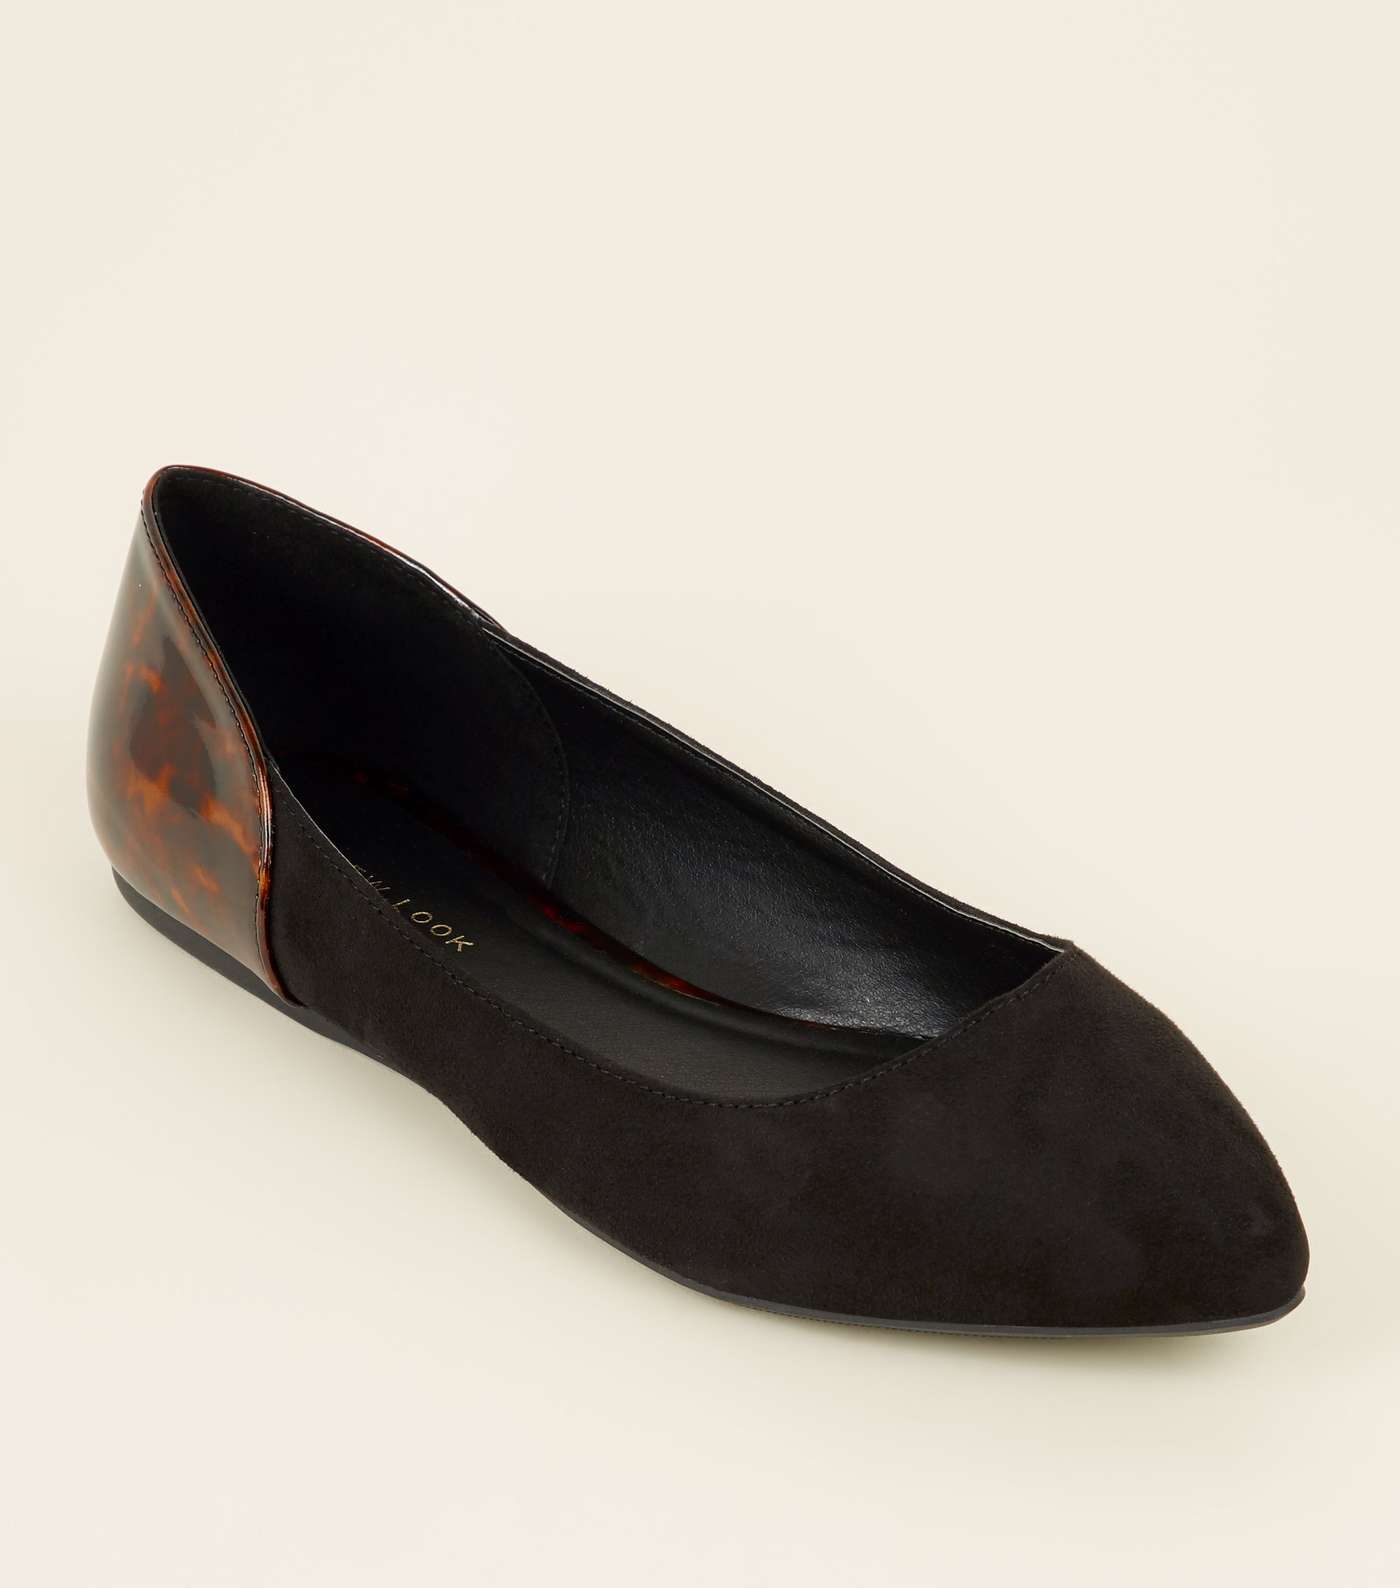 Wide Fit Black and Patent Tortoiseshell Pumps